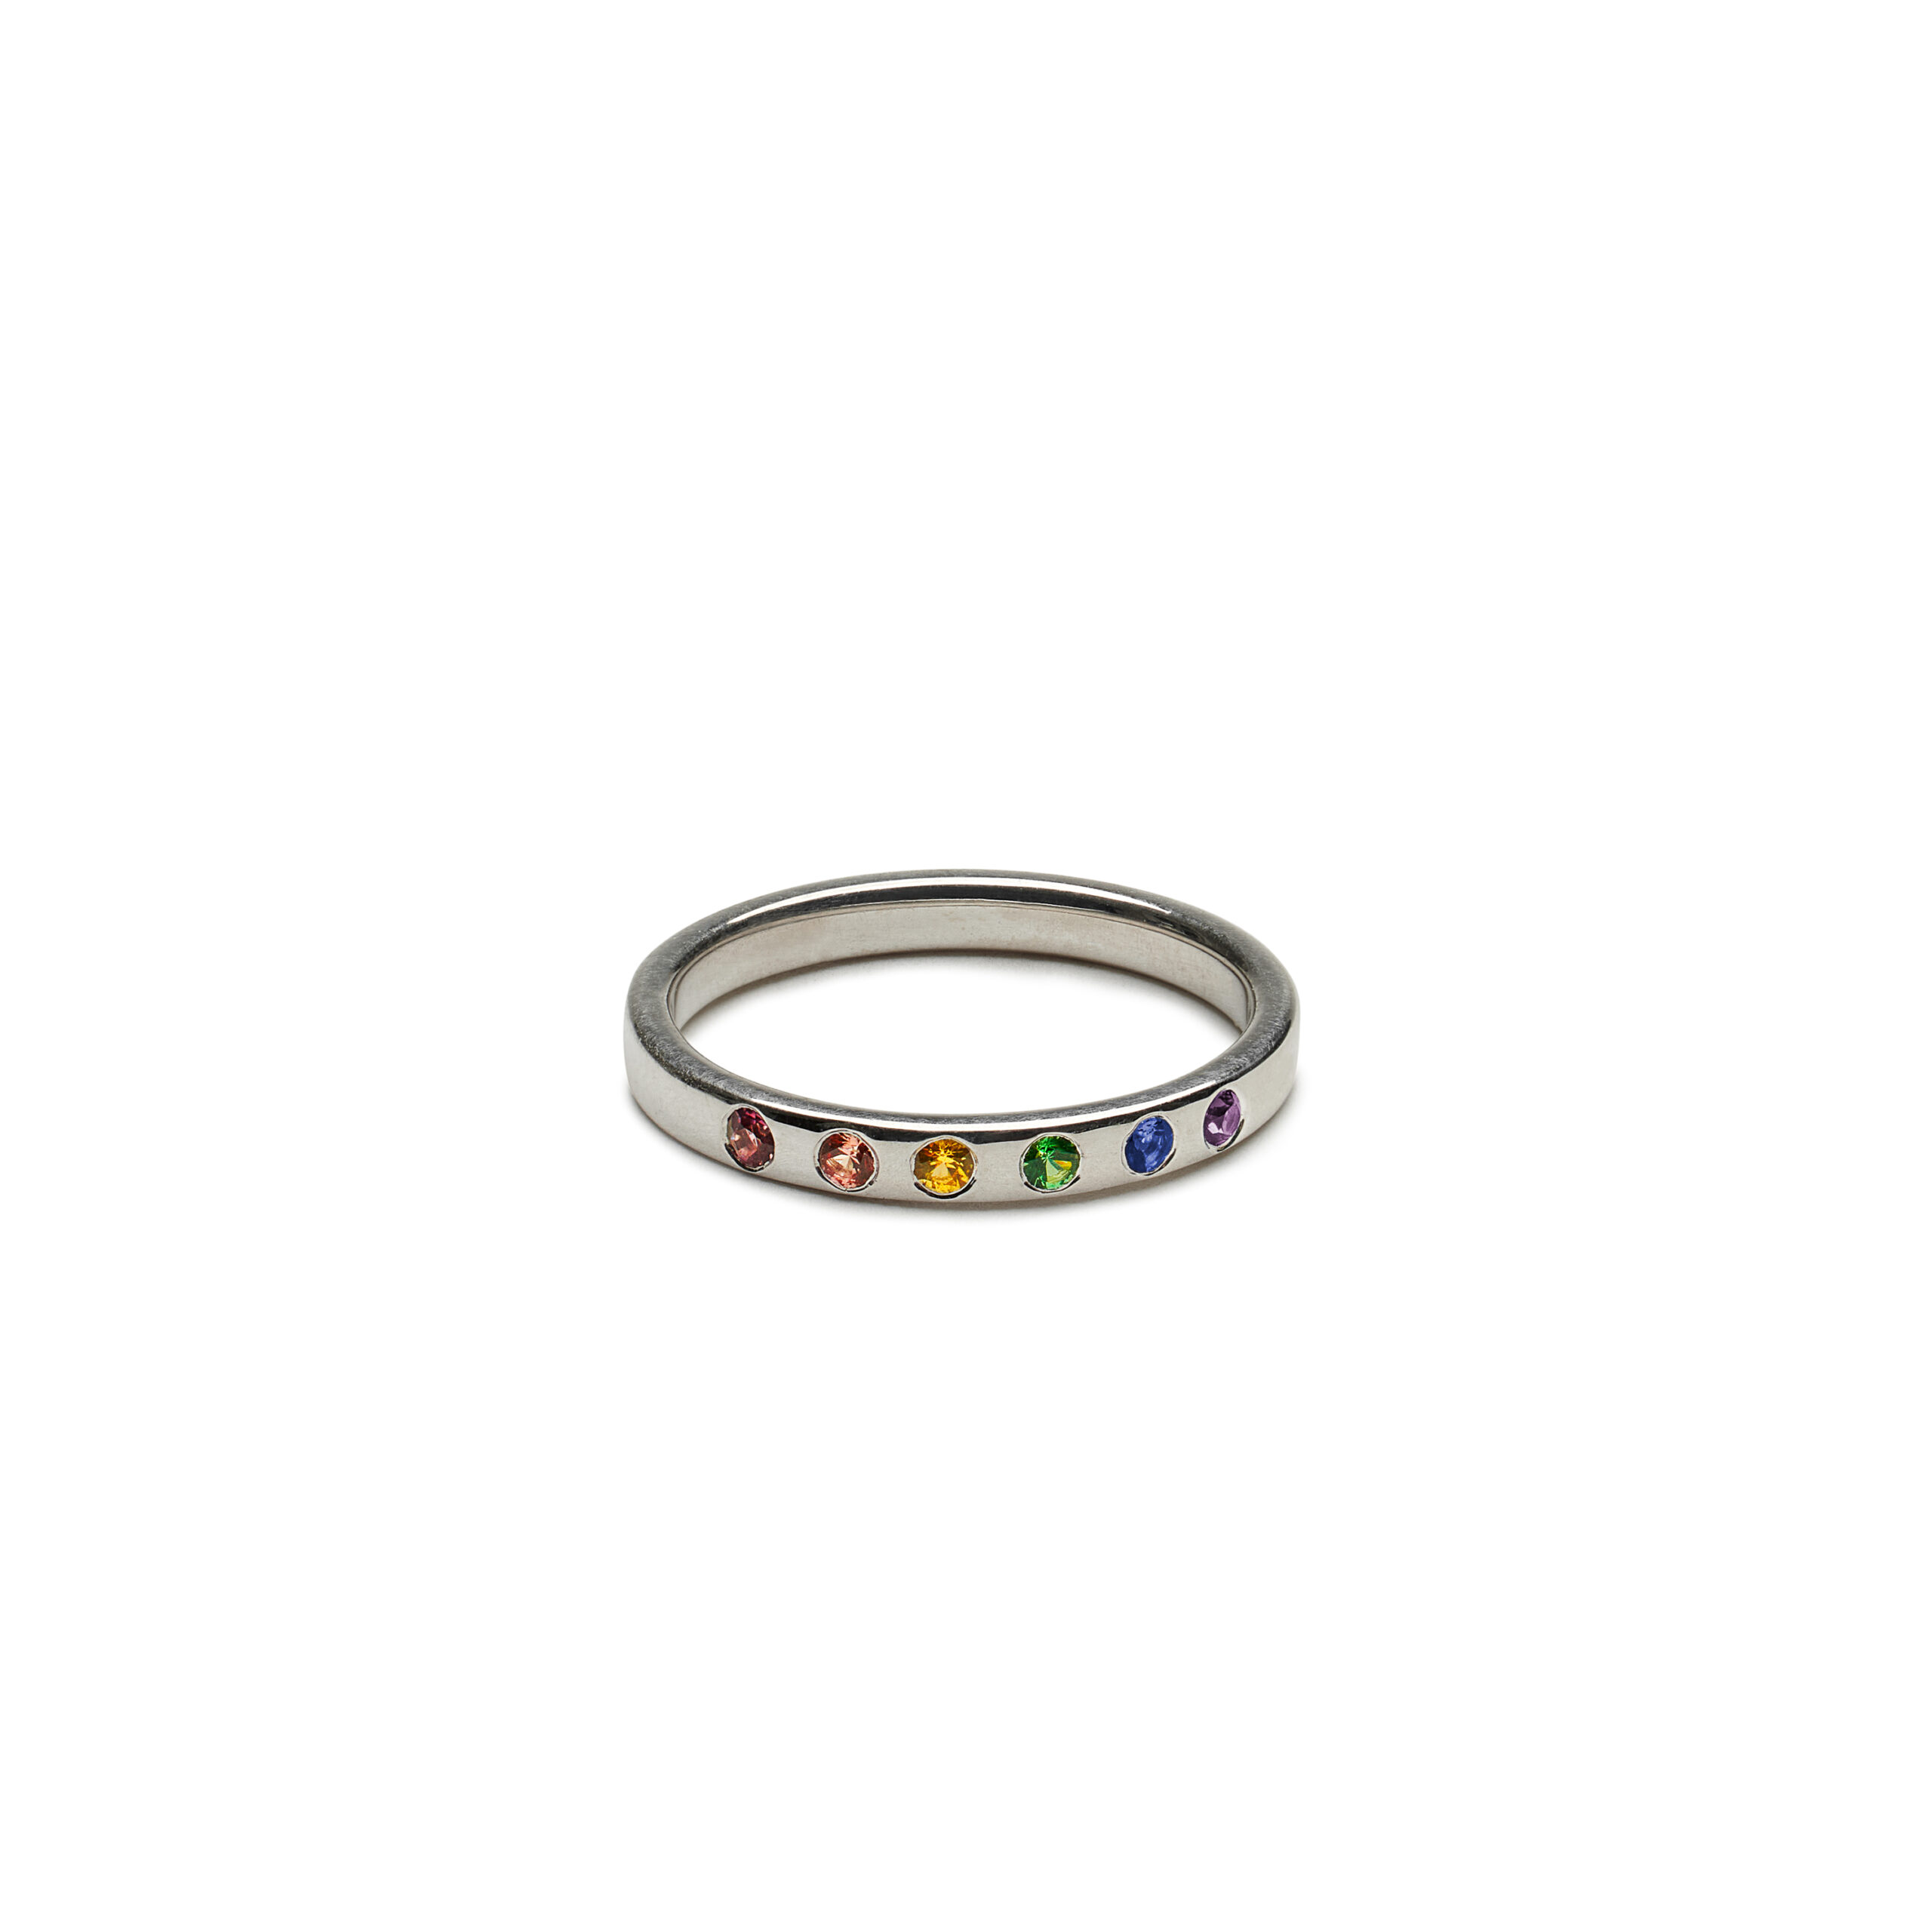 Rings depicting multiple stones arranged in a rainbow